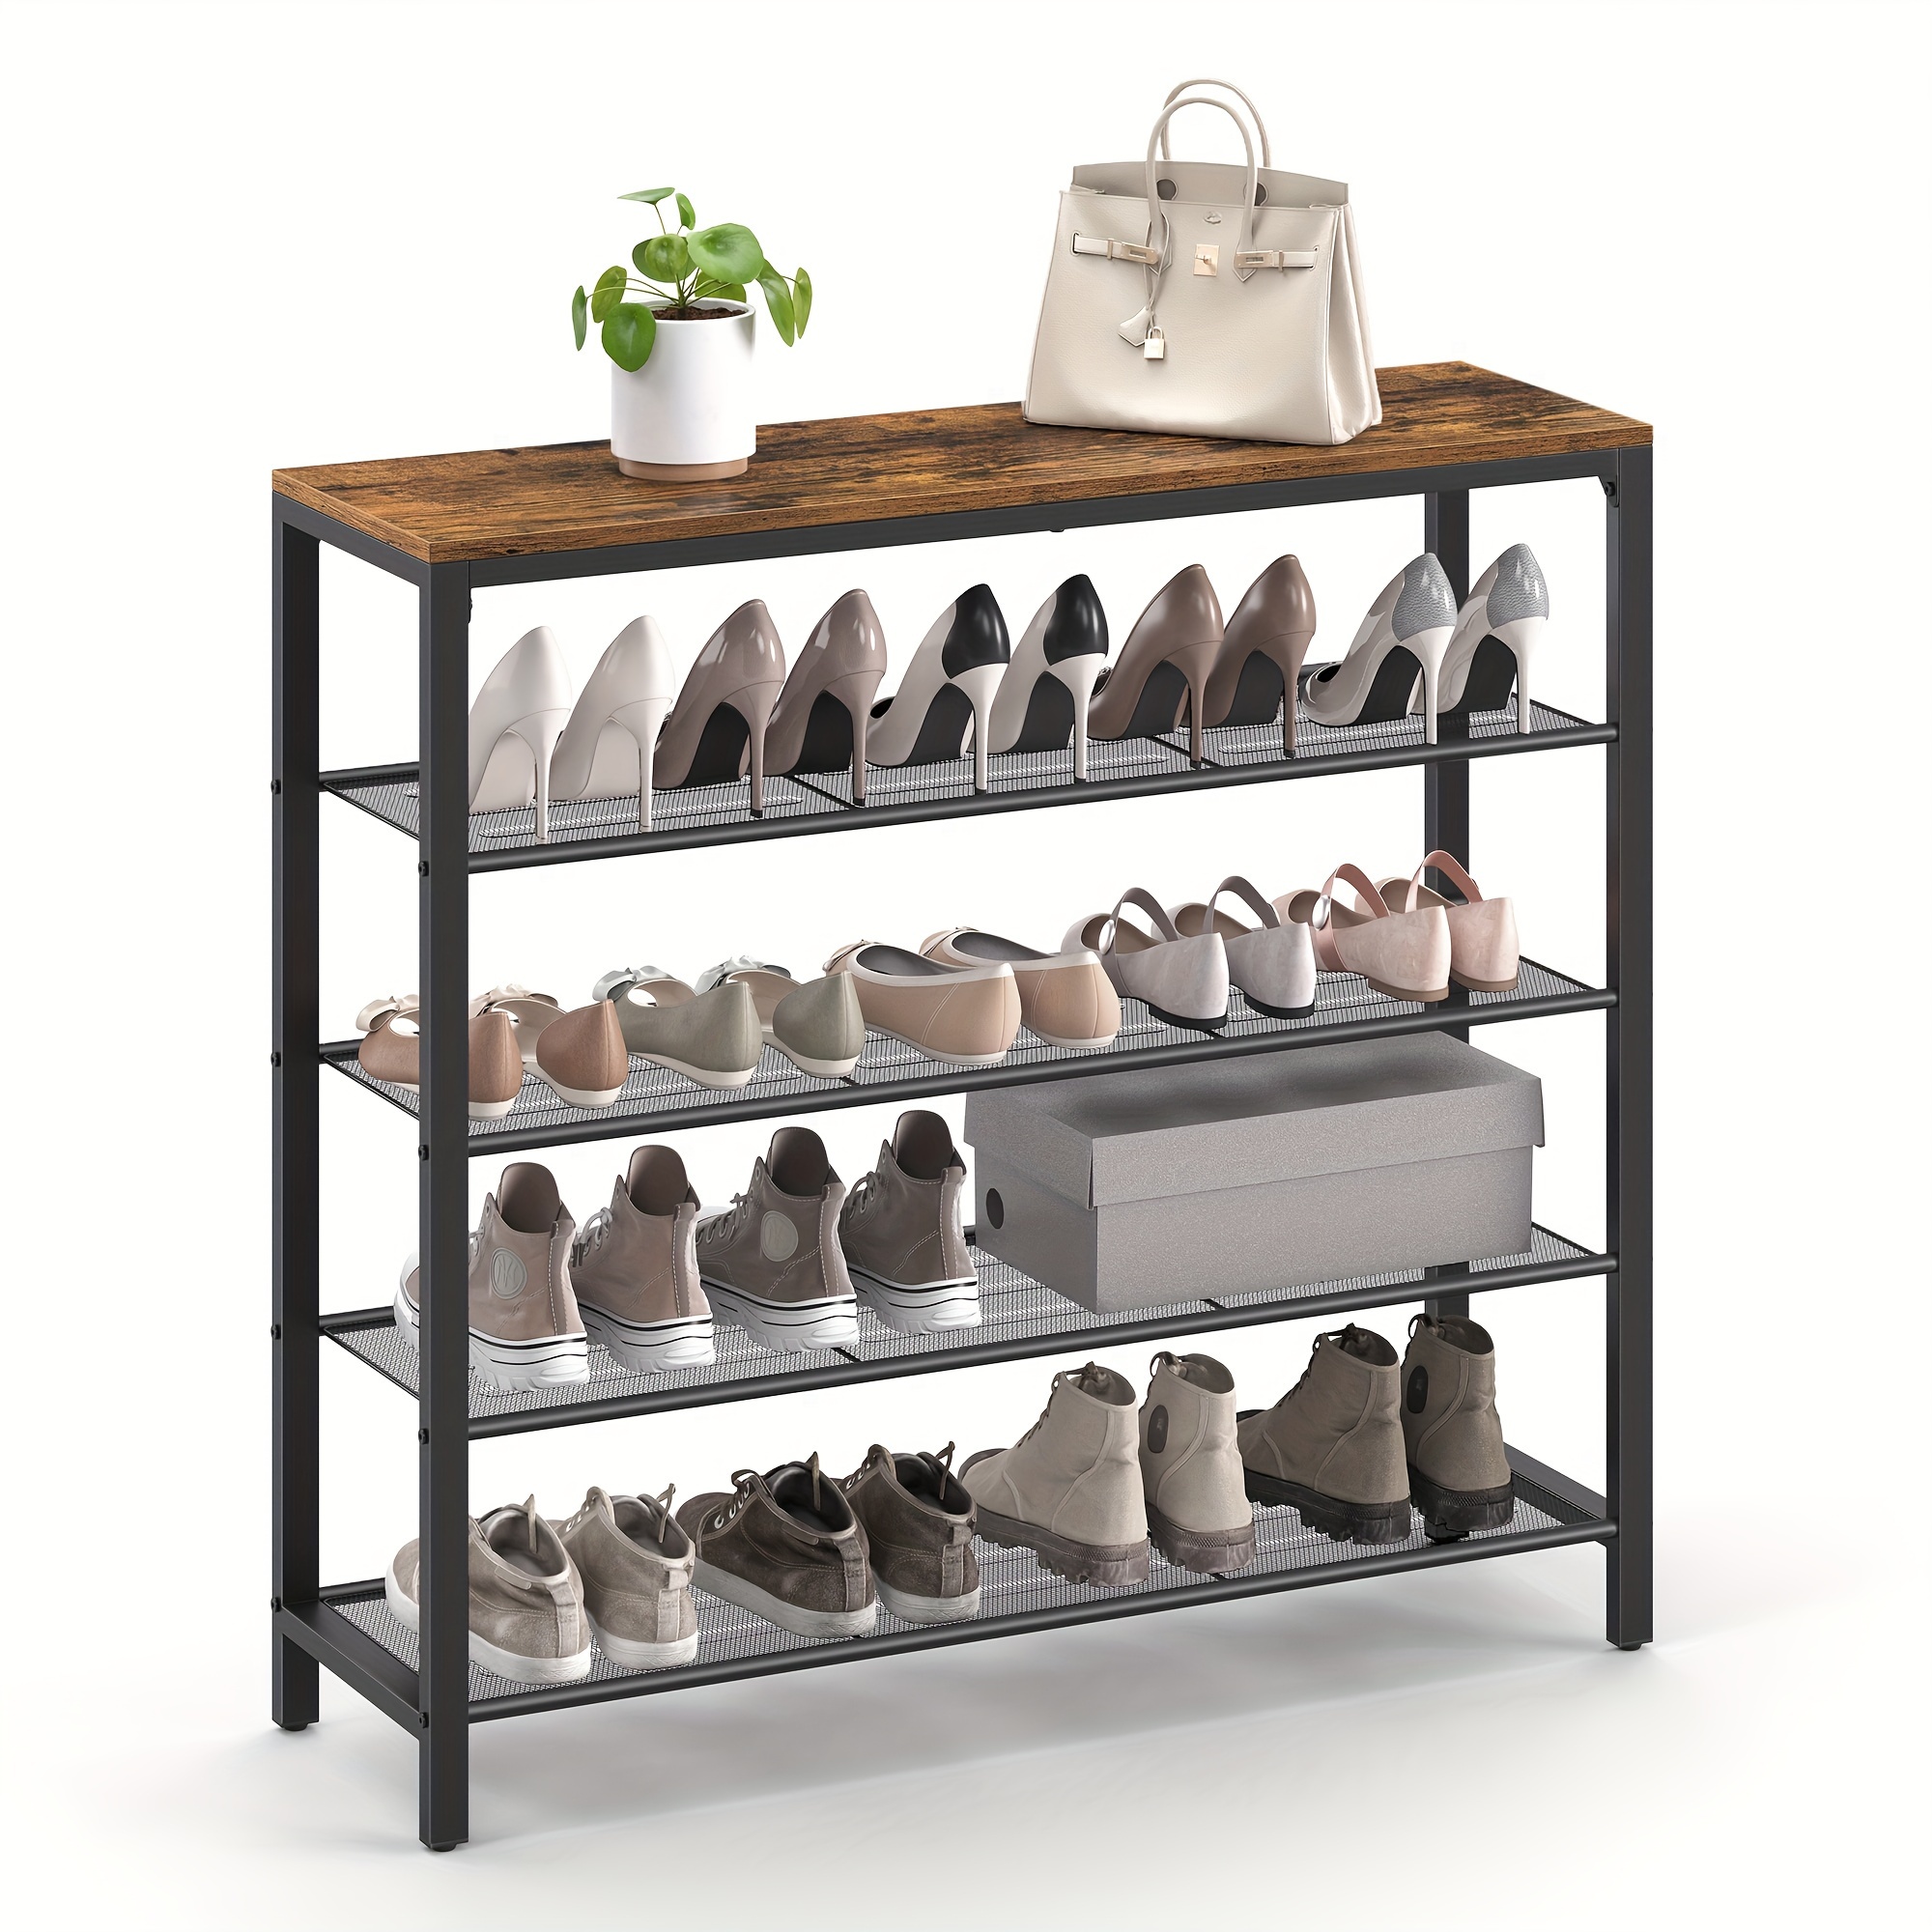 

1pc Shoe Rack, 5-tier Shoe Storage Organizer With 4 Metal Mesh Shelves For 16-20 Pairs And Large Surface For Bags, For Entryway, Hallway, Closet